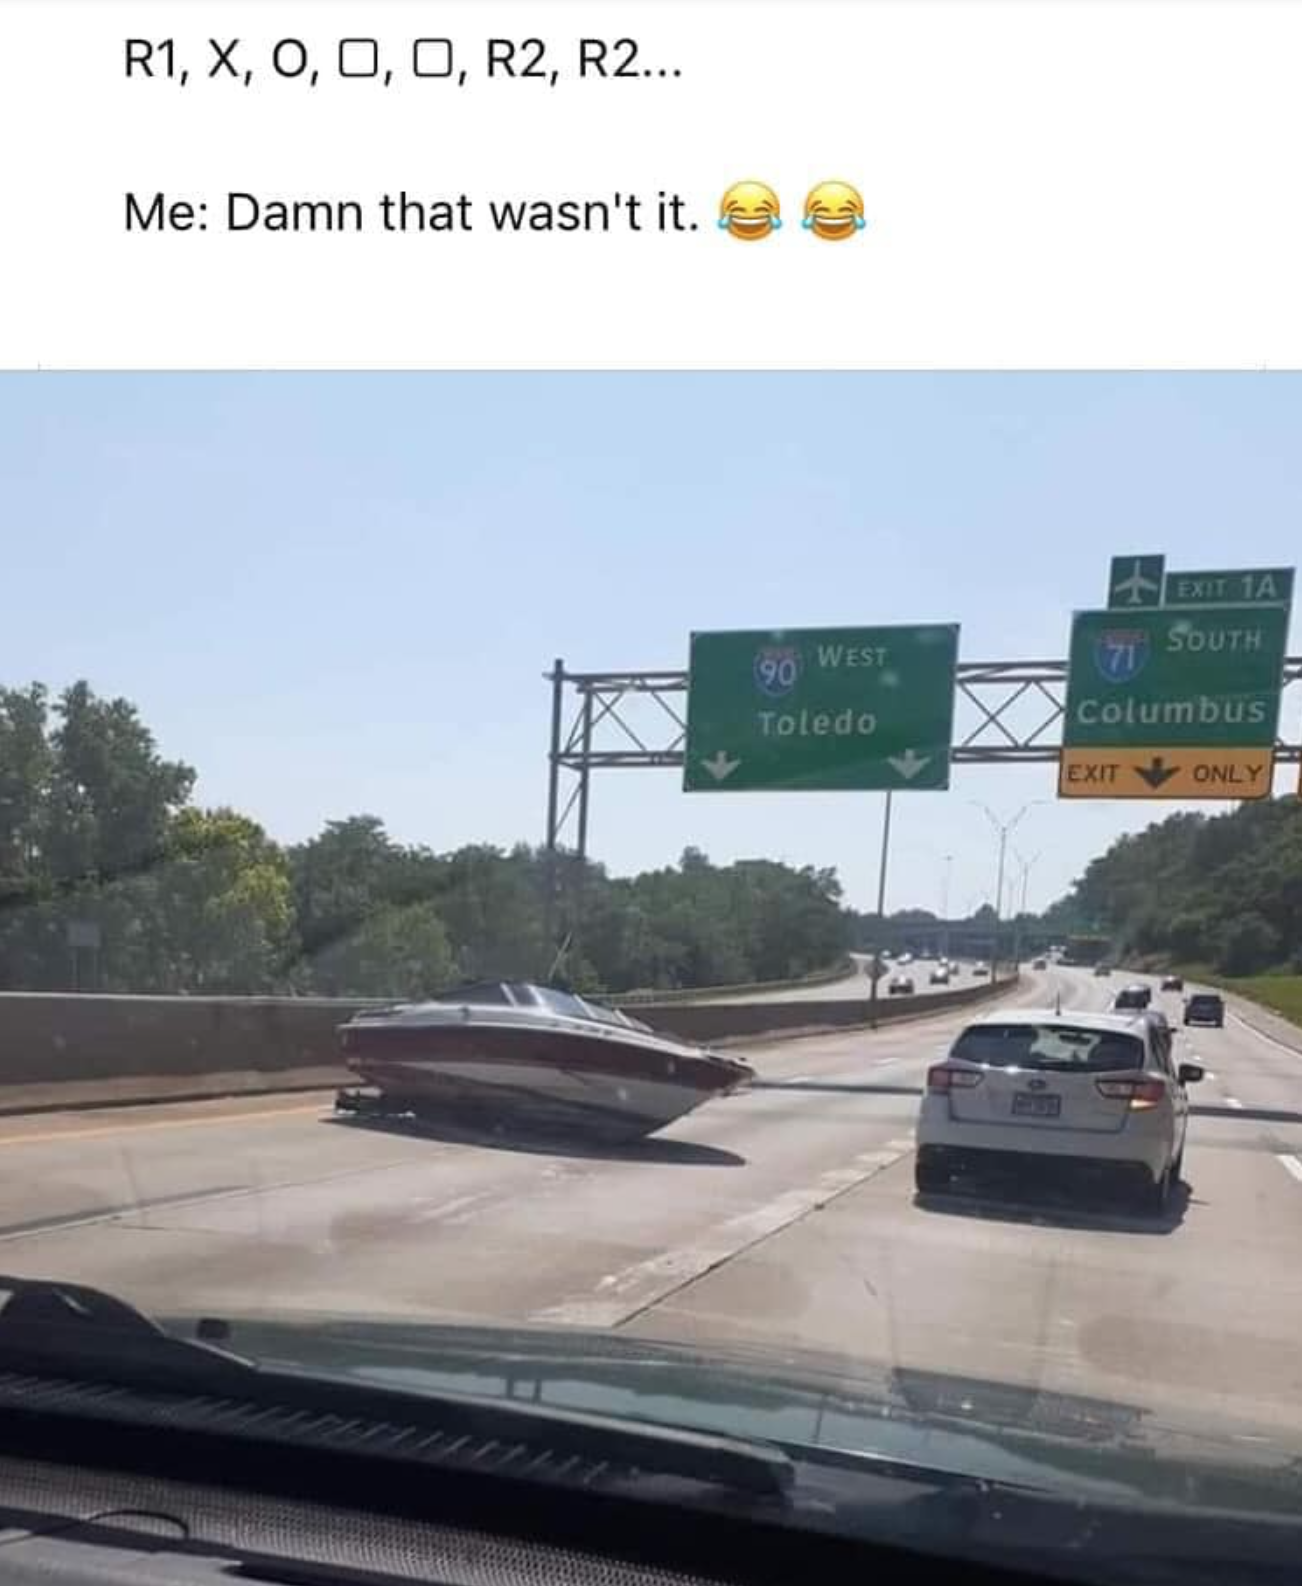 funny gaming memes - R1, X, 0, 0, 0, R2, R2... Me Damn that wasn't it. Wss Ta 71 South Columbus Toledo Exit Only